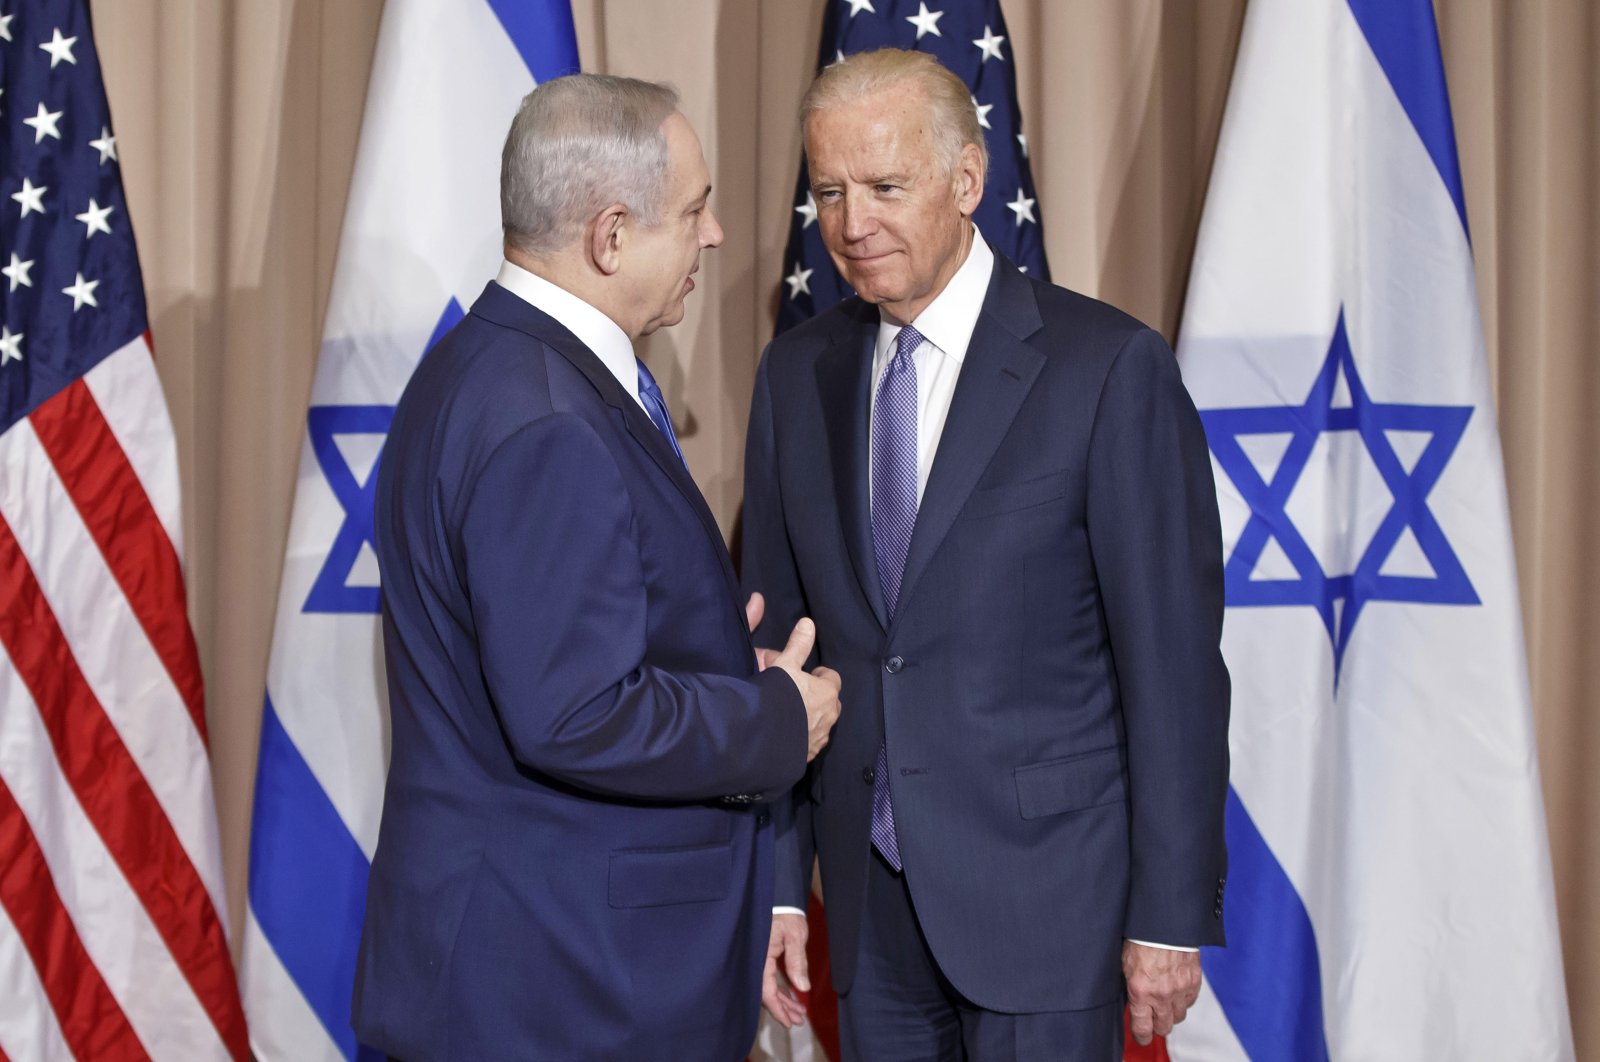 Israeli Prime Minister Benjamin Netanyahu, left, and then-U.S. Vice-President Joe Biden pose for the media prior to a meeting on the sidelines of the World Economic Forum in Davos, Switzerland, Thursday, Jan. 21, 2016. (AP File Photo)